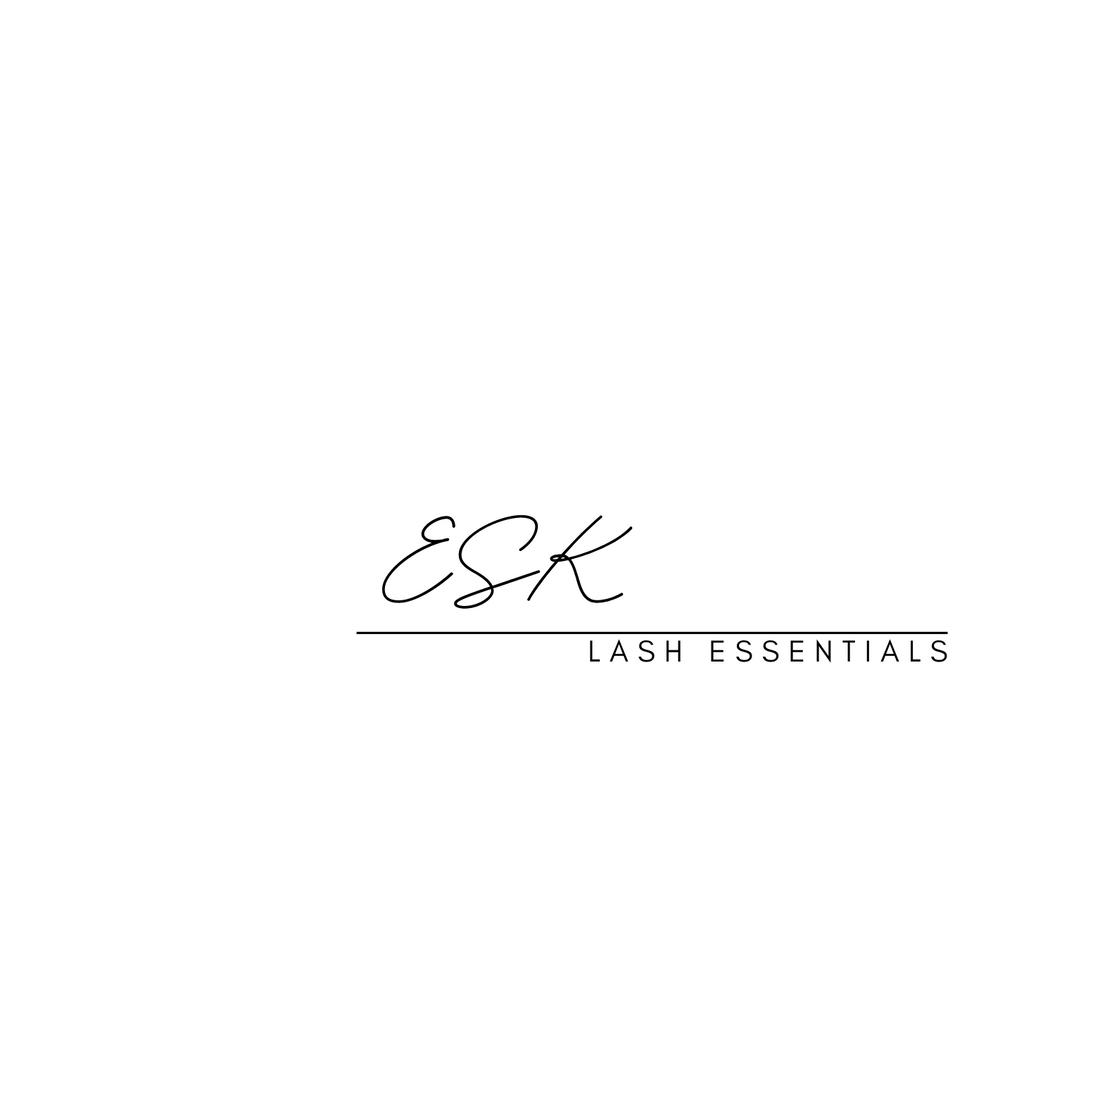 ESK Pro-Made Fans: Marketing ESK eyelash extension products and supplies 8/12/23 2:27pm